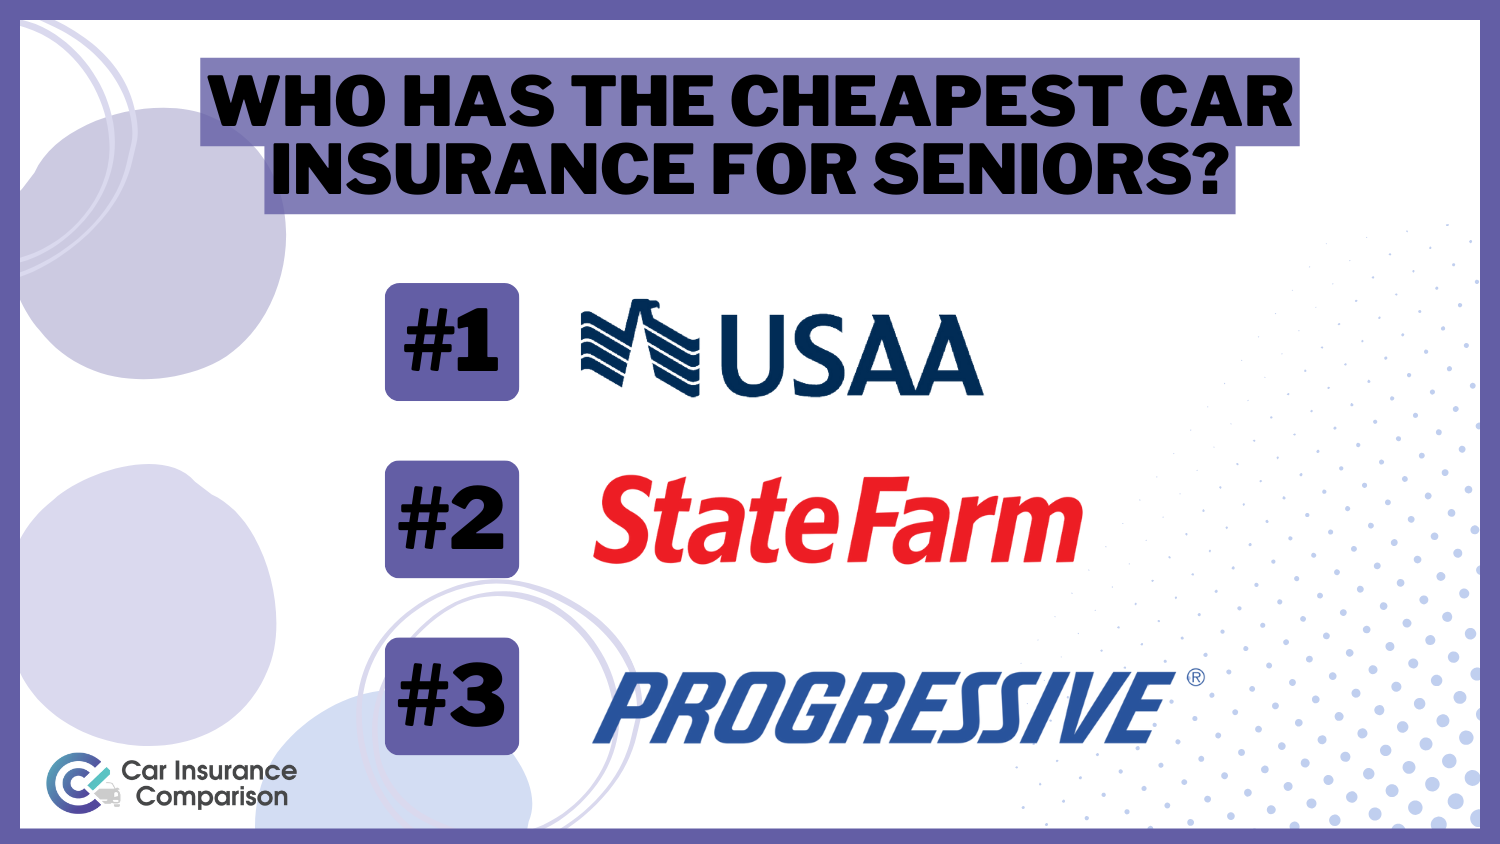 Who Has the Cheapest Car Insurance for Seniors?: USAA, State Farm, and Progressive